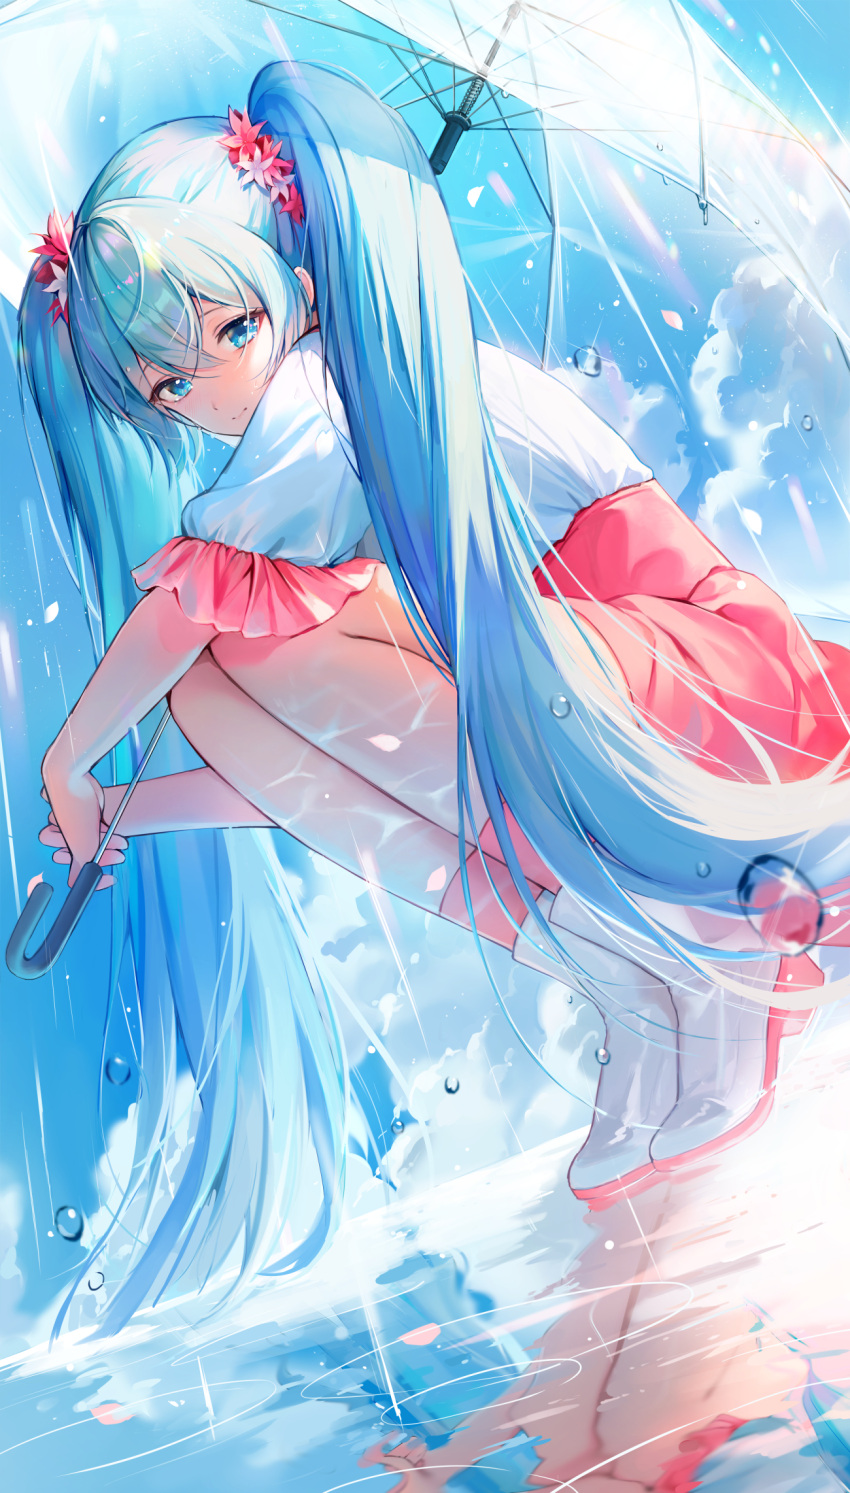 1girl bangs blue_eyes blue_hair boots commentary_request day eso_(toory) eyebrows_visible_through_hair flower full_body hair_between_eyes hair_flower hair_ornament hatsune_miku highres holding holding_umbrella long_hair looking_at_viewer melt_(vocaloid) pink_legwear pink_skirt rain red_flower reflection reflective_floor shirt skirt sky socks solo squatting transparent transparent_umbrella twintails umbrella very_long_hair vocaloid white_footwear white_shirt